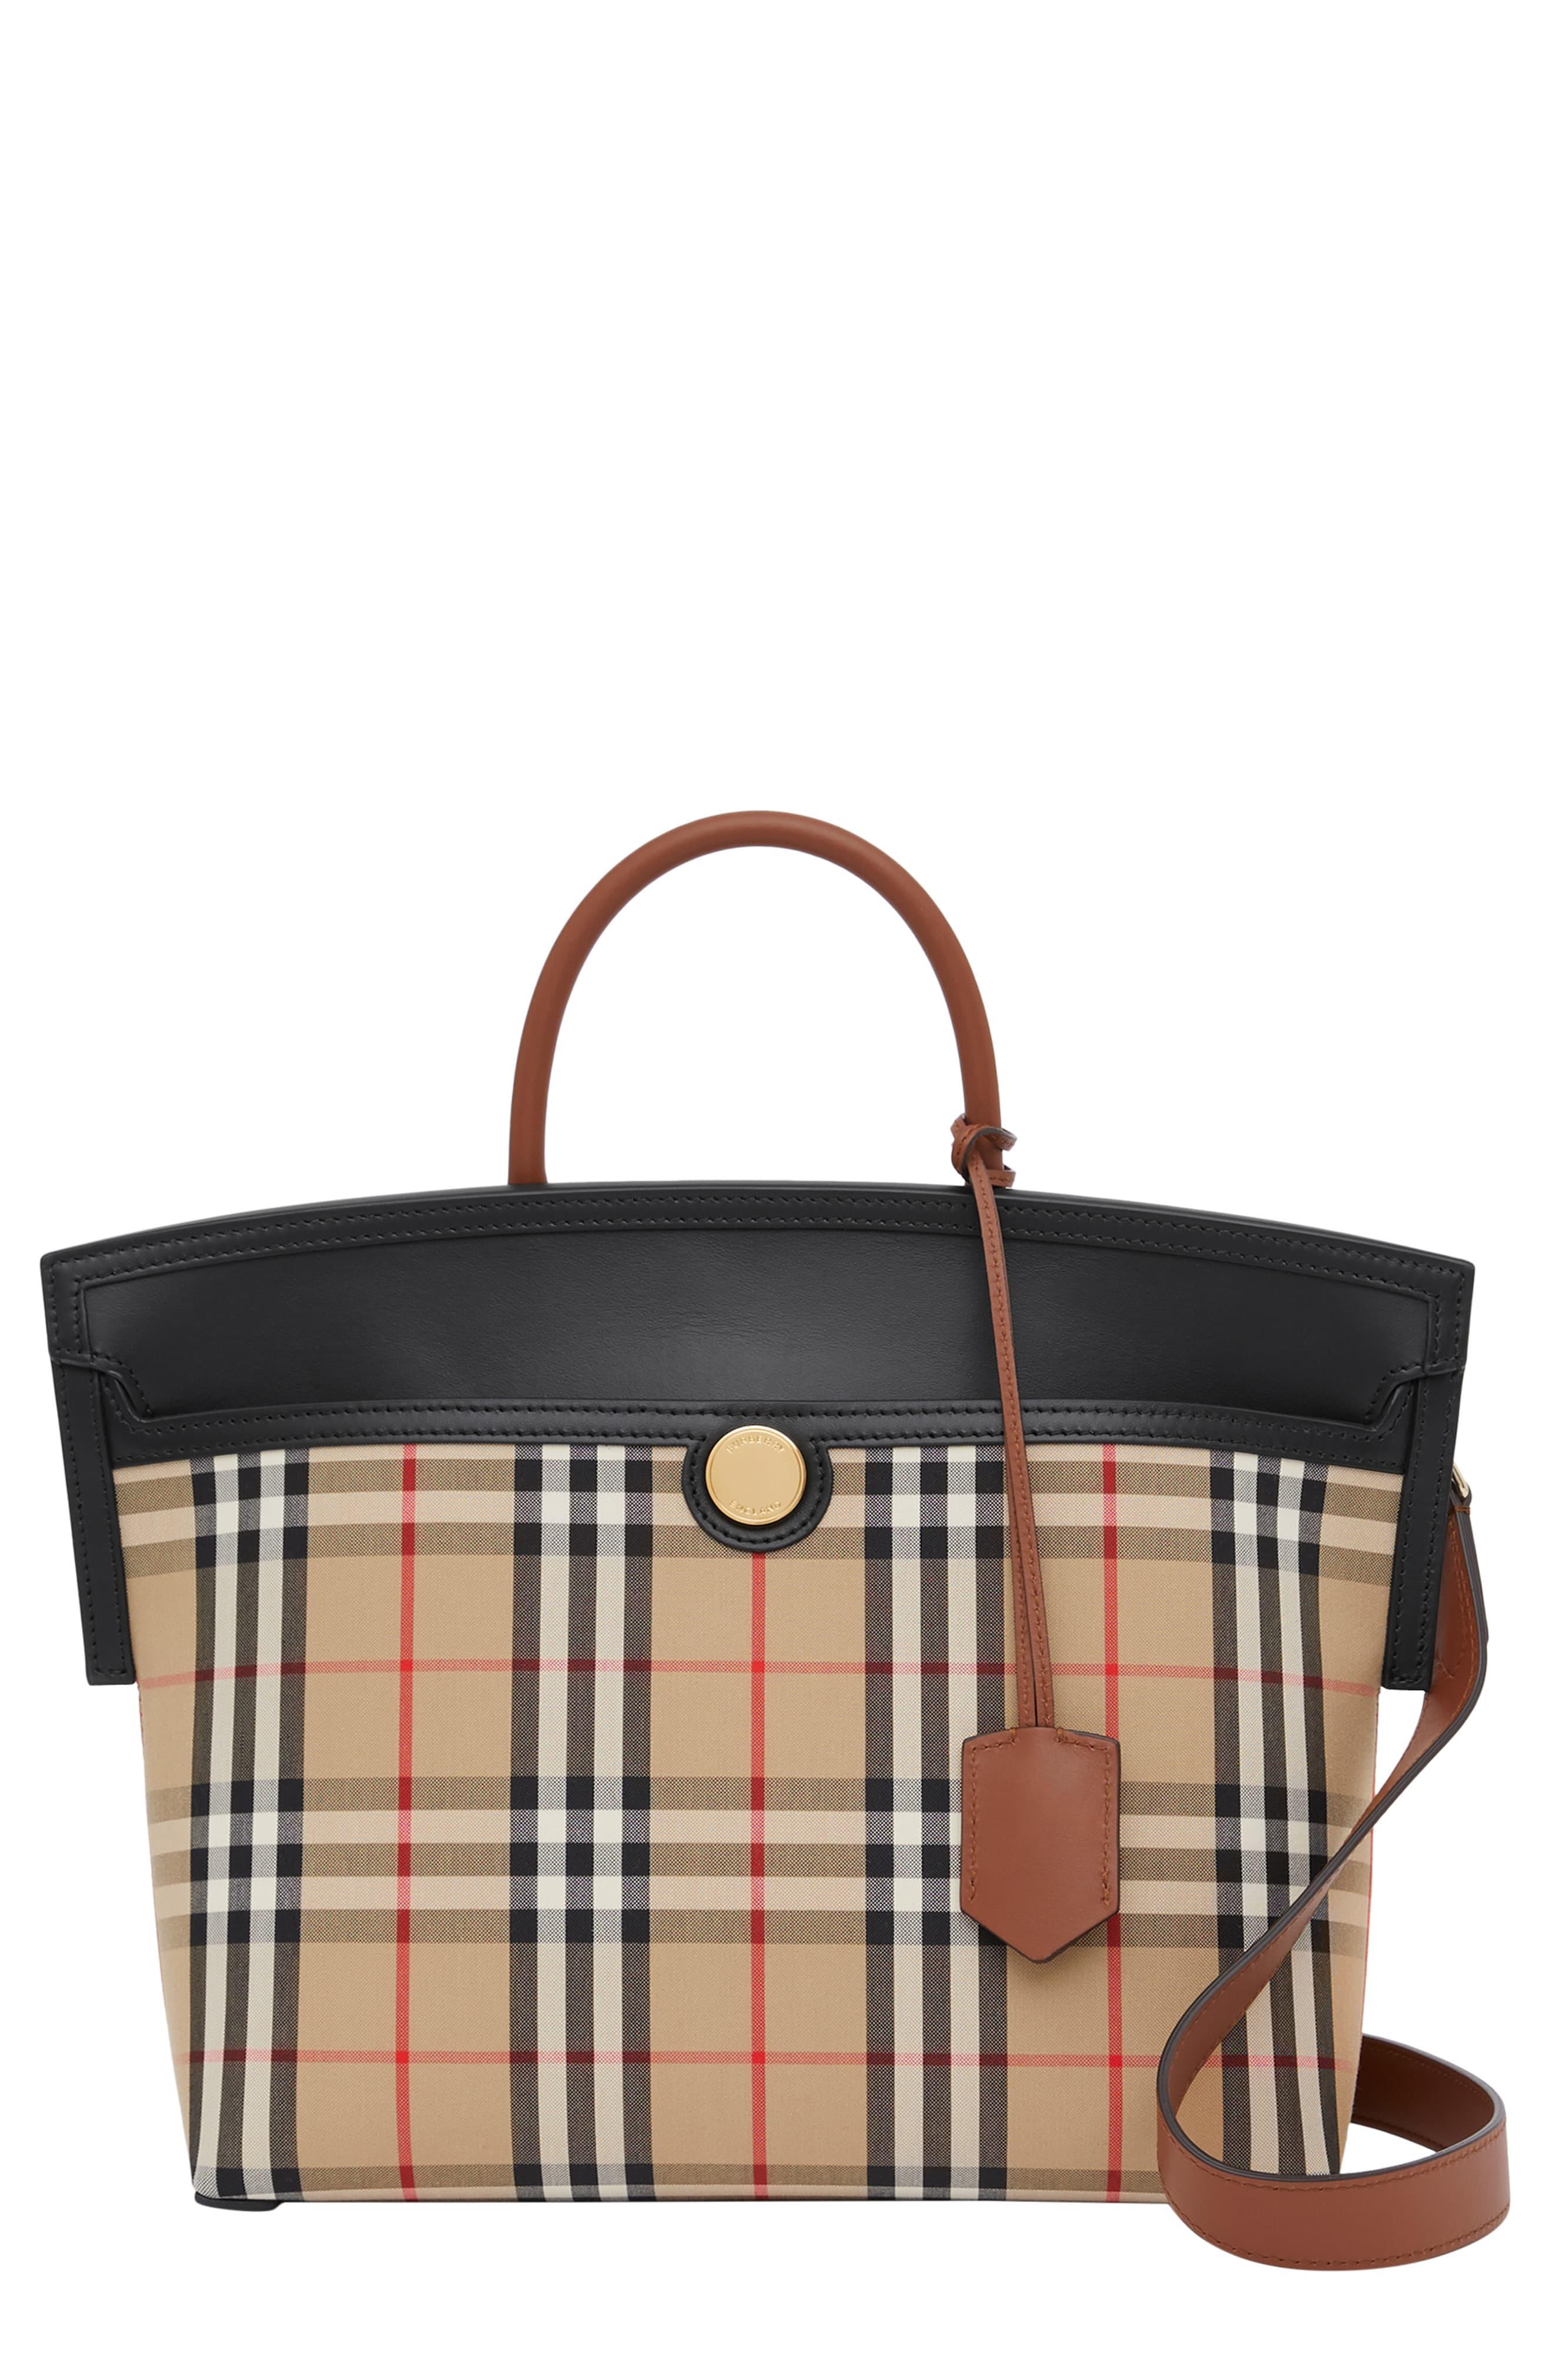 Burberry Kennedy Small Vintage Check Barrel Bag in Brown